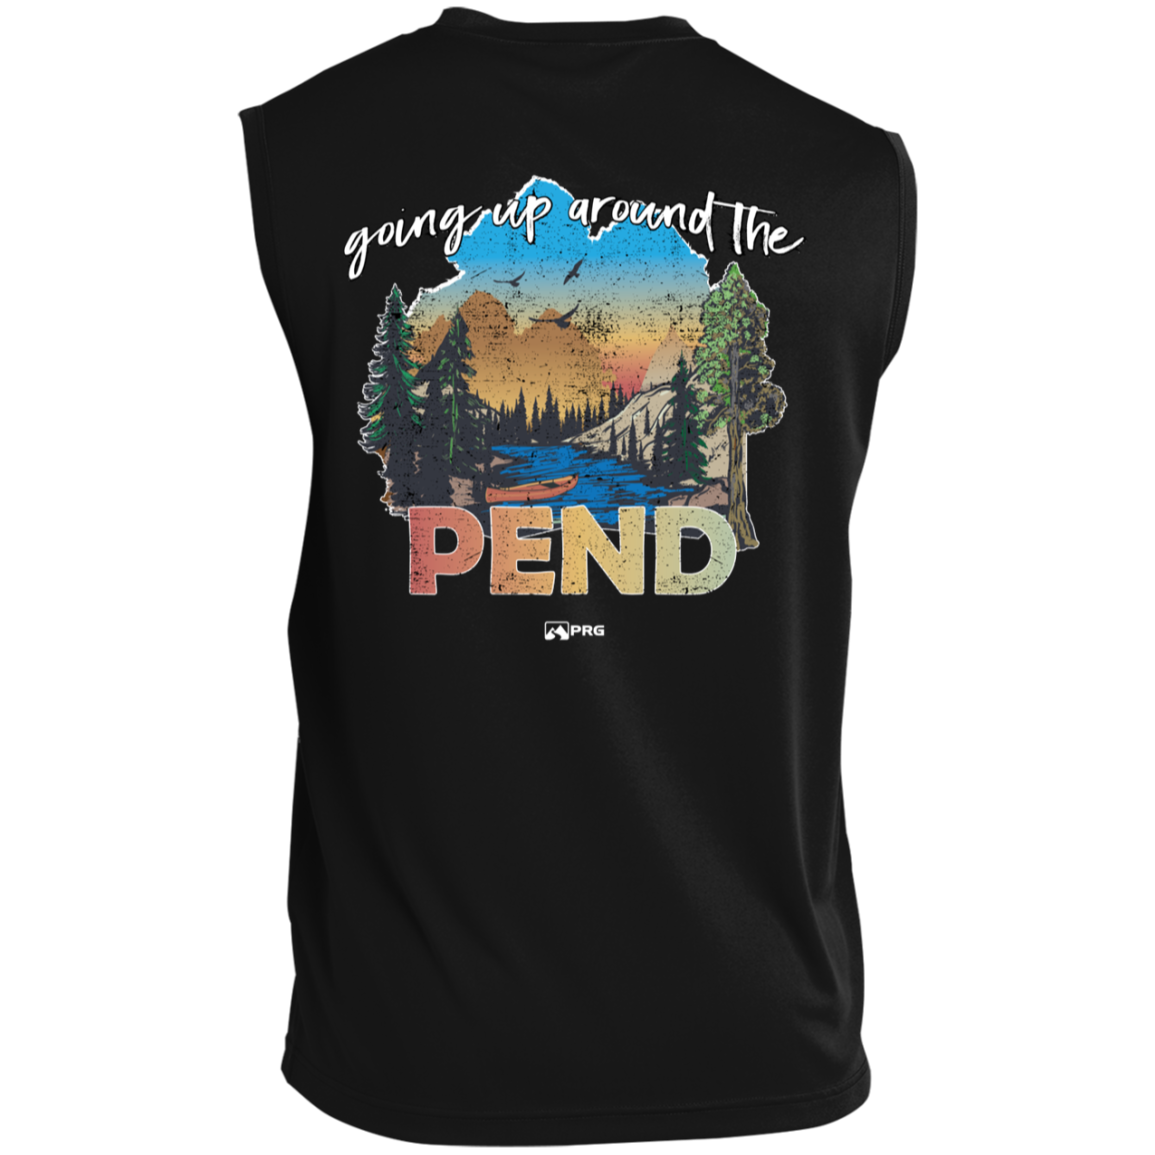 Around the Pend (Front & Back) - Sleeveless